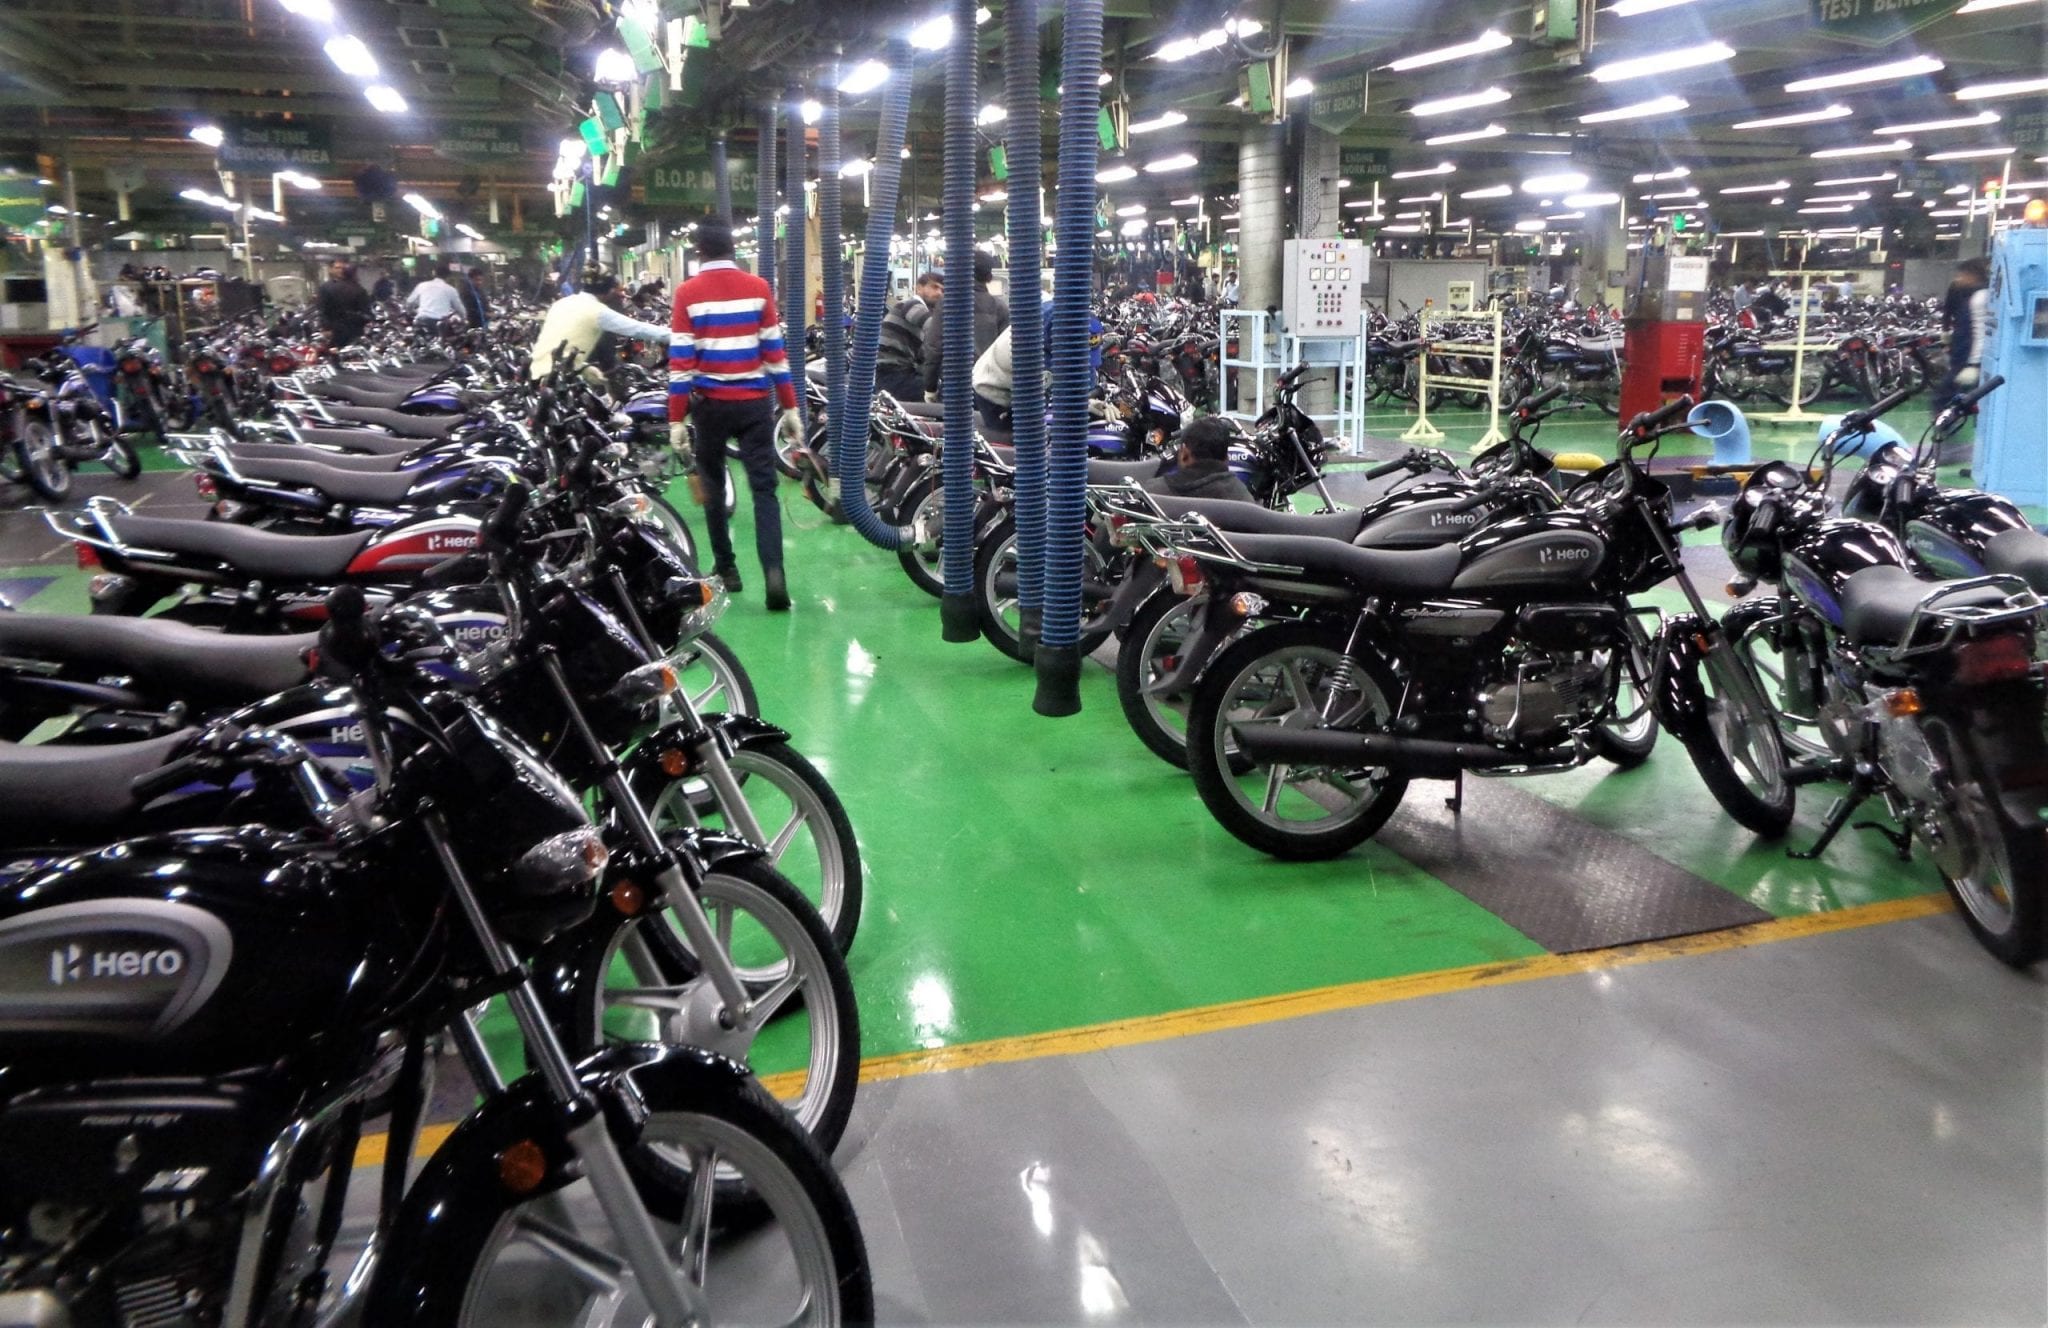 Hero MotoCorp warehouse with dozens of motorcycles lined up on display.